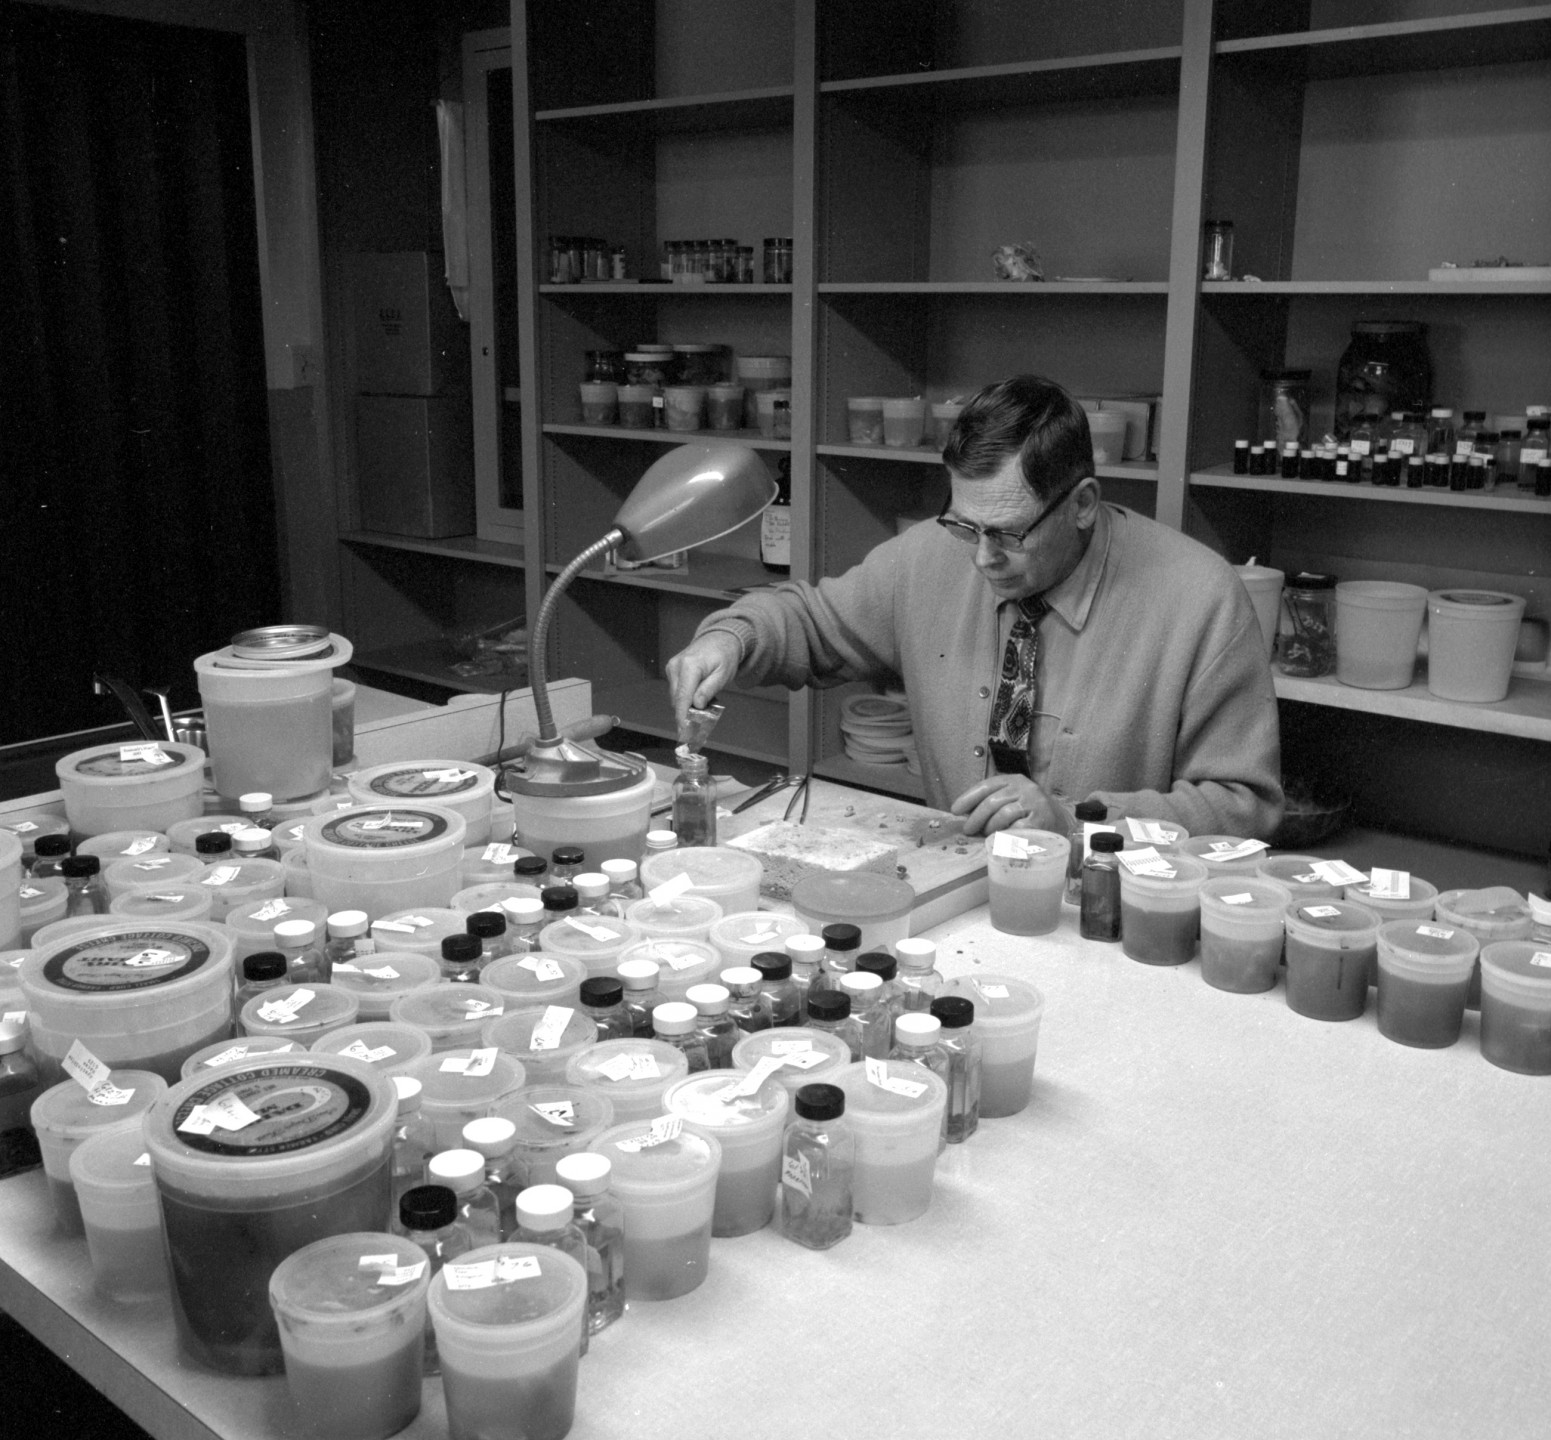 Lynn Griner, DVM, Ph.D., was a professor of pathology at Colorado State University for 15 years before he came to work for the San Diego Zoo in 1964. During his tenure at the Zoo, Dr. Griner attended and presented papers at seven meetings of the International Symposium on Diseases of Zoo and Wild Animals, and he was the director in the 1960s of what was known as the Zoo's Animal Health Department, comprising veterinary services, pathology, and research—a wide range of responsibilities! Upon his retirement in 1978, Dr. Kurt Benirschke said 